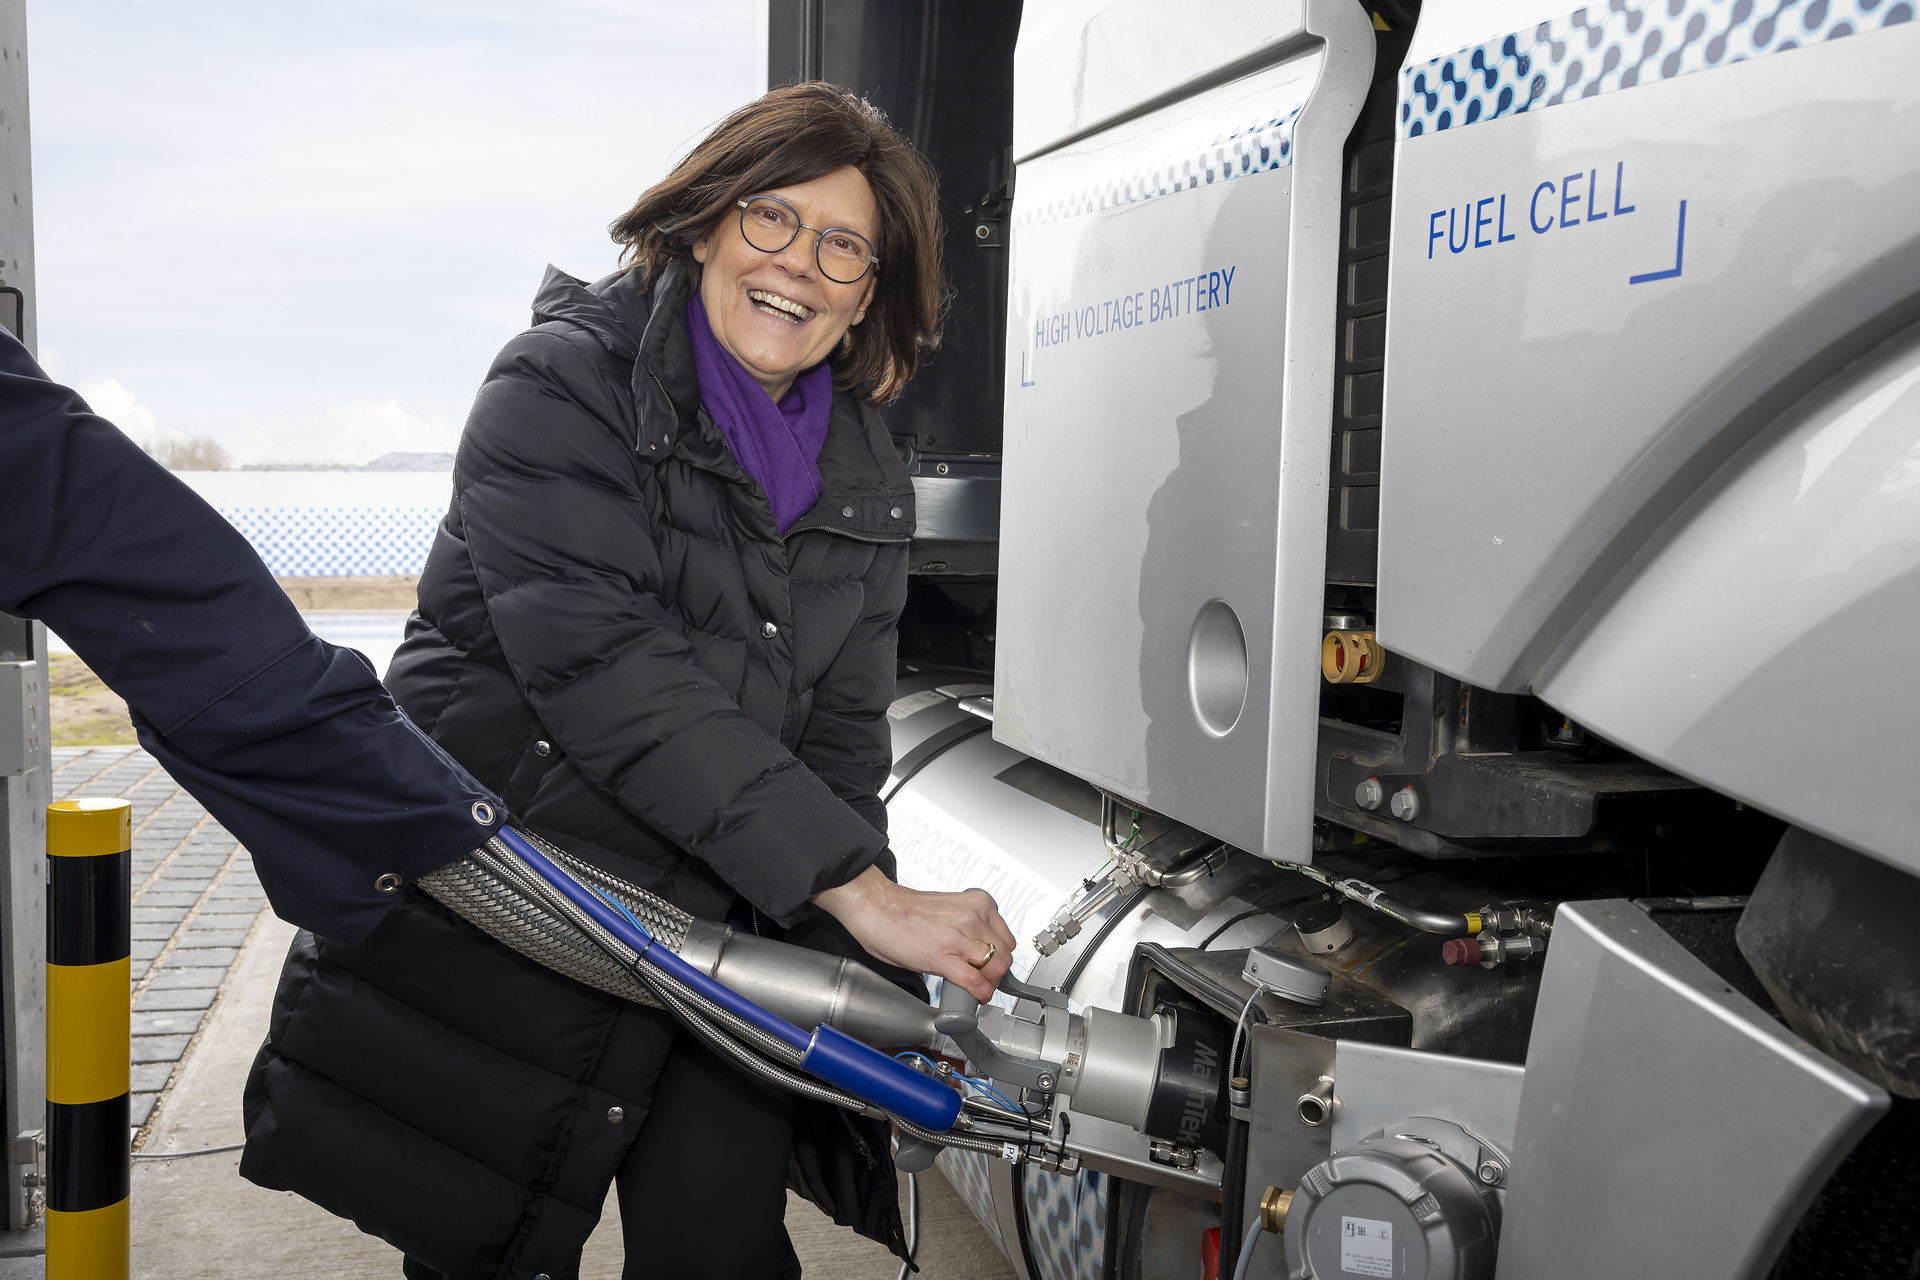 Safe, Fast and Simple: Daimler Truck and Linde Set New Standard for Liquid Hydrogen Refueling Technology